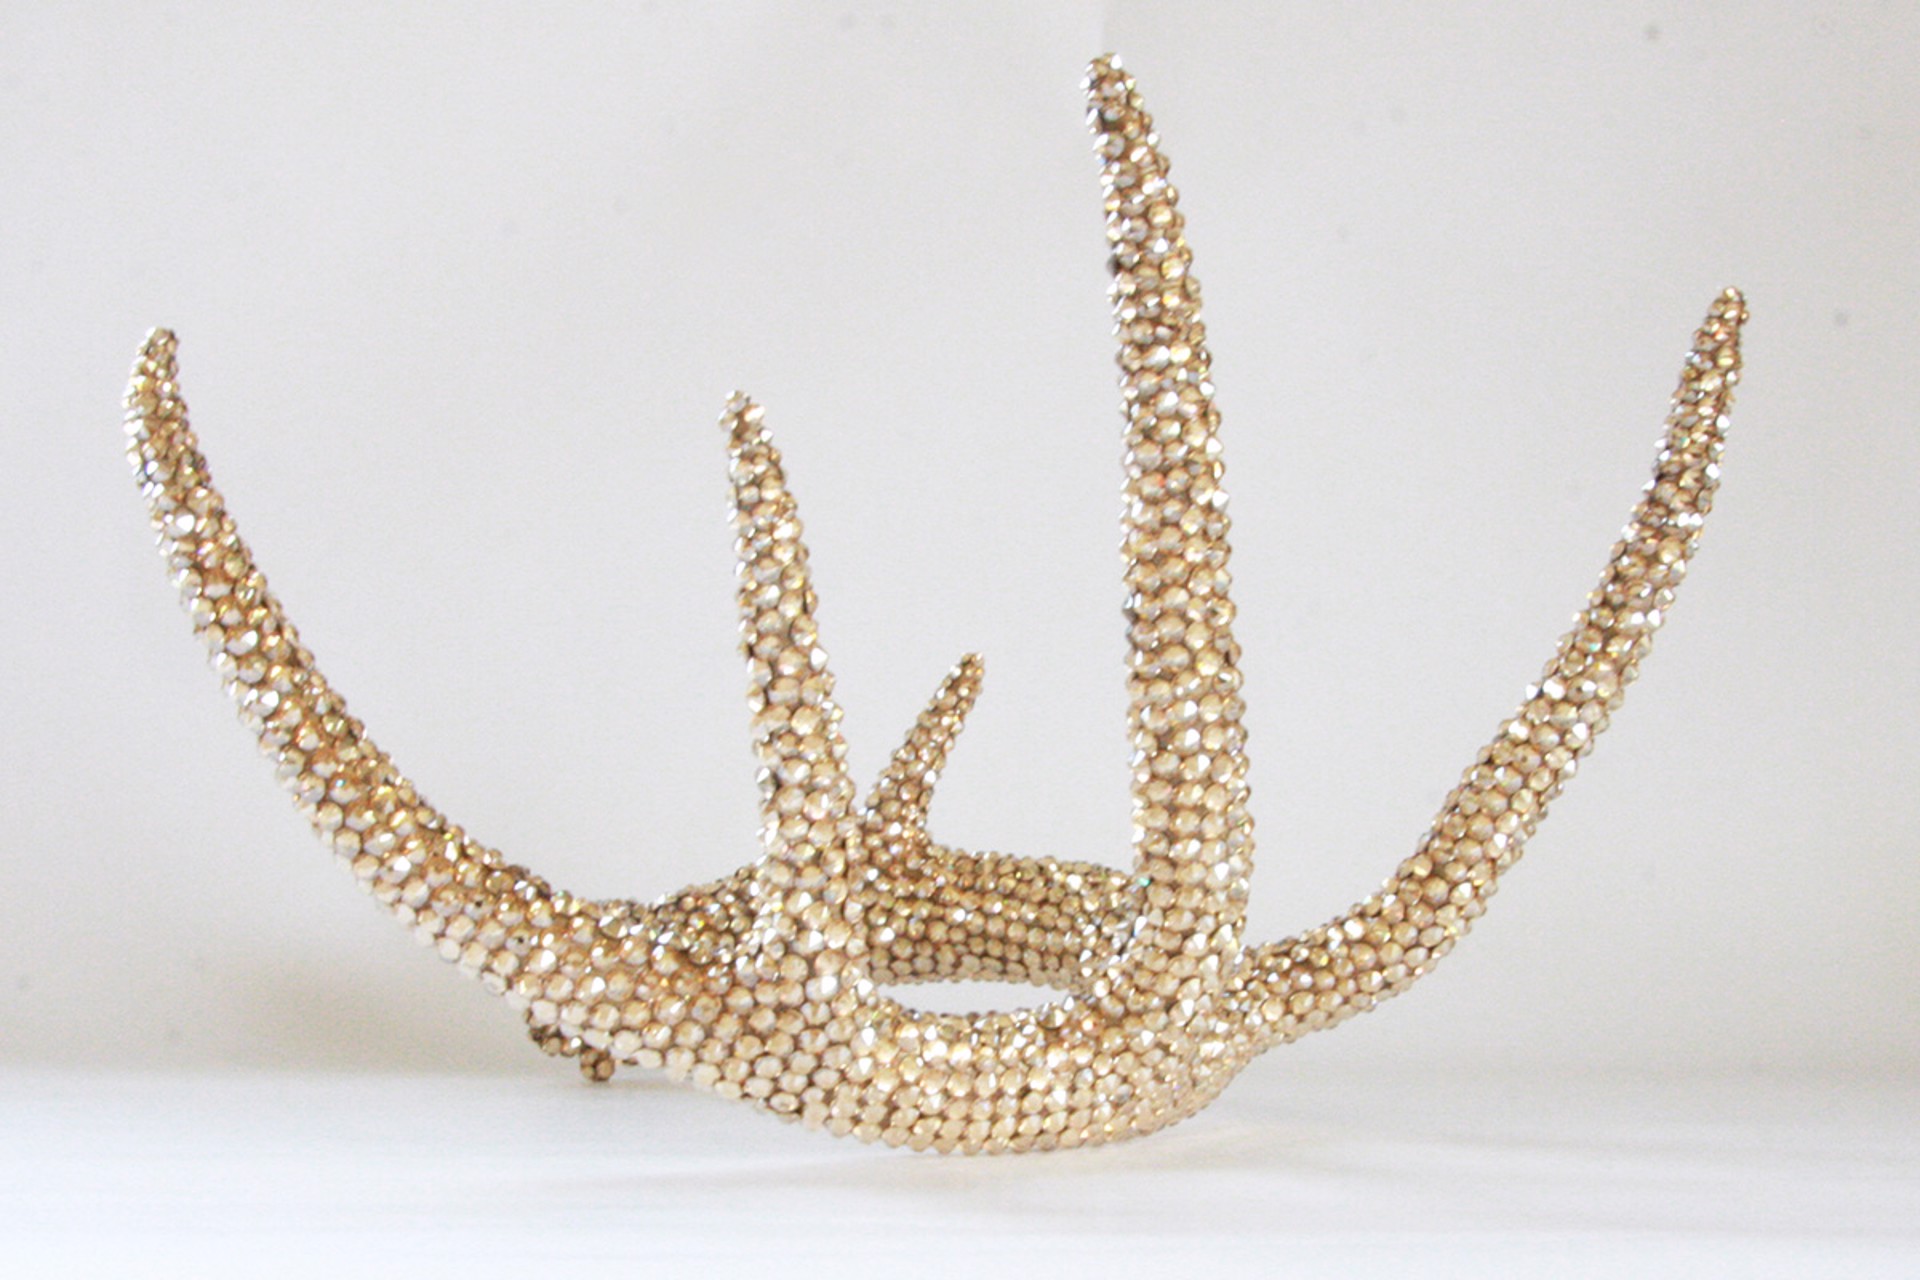 GOLD ANTLER 1 by Kristin Zinkl